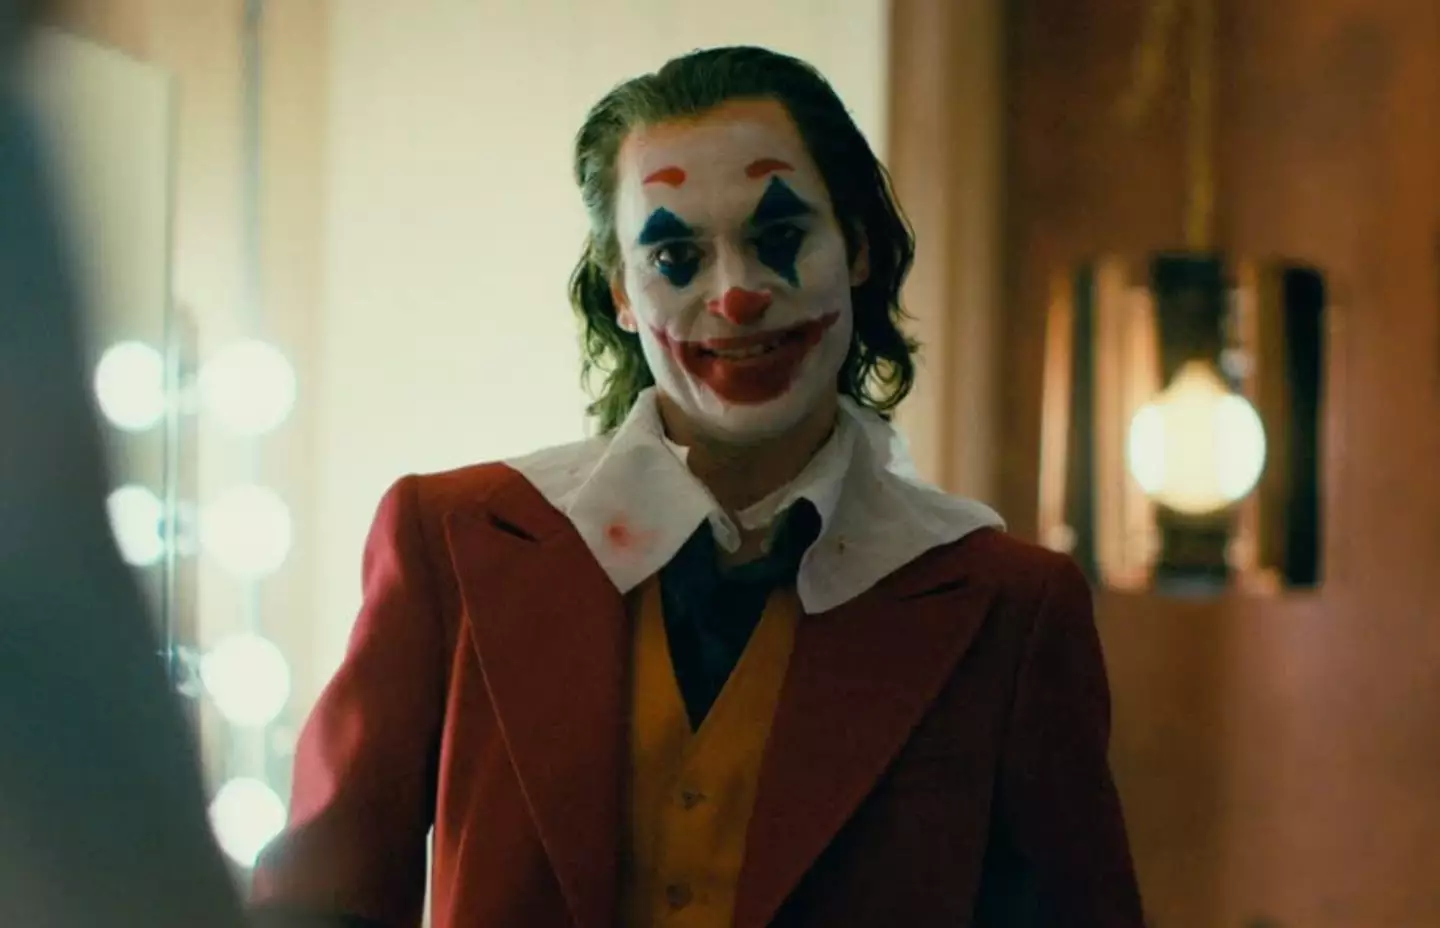 Fans are concerned for Joaquin Phoenix ahead of the Joker sequel.